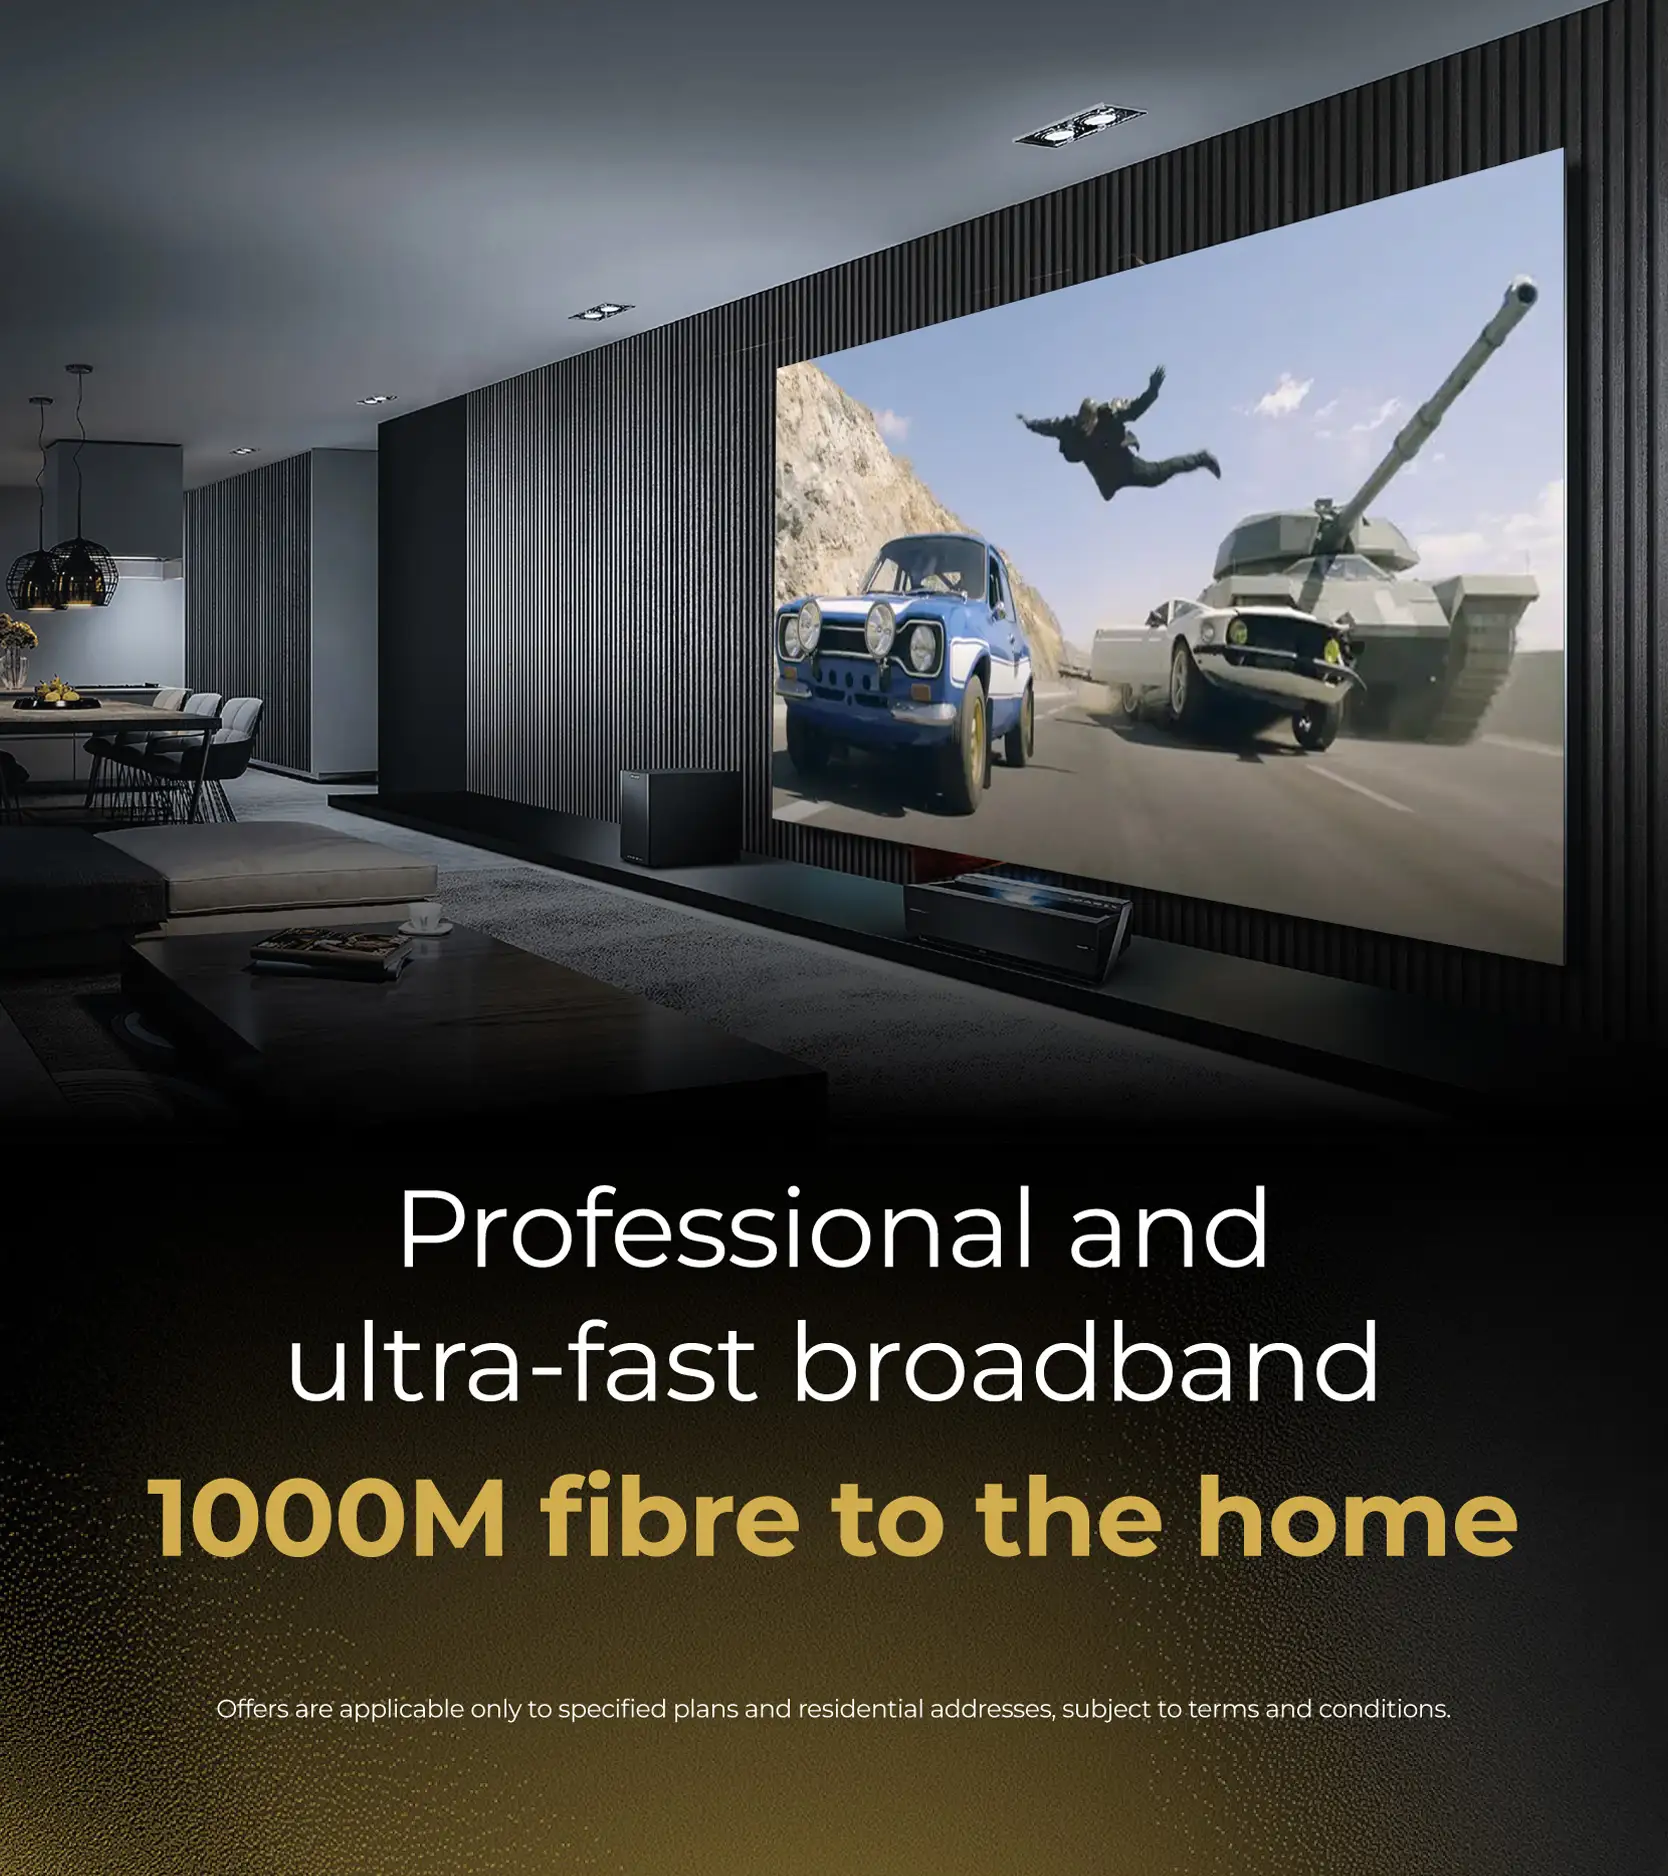 Professional and ultra-fast broadband 1000M fibre to the home